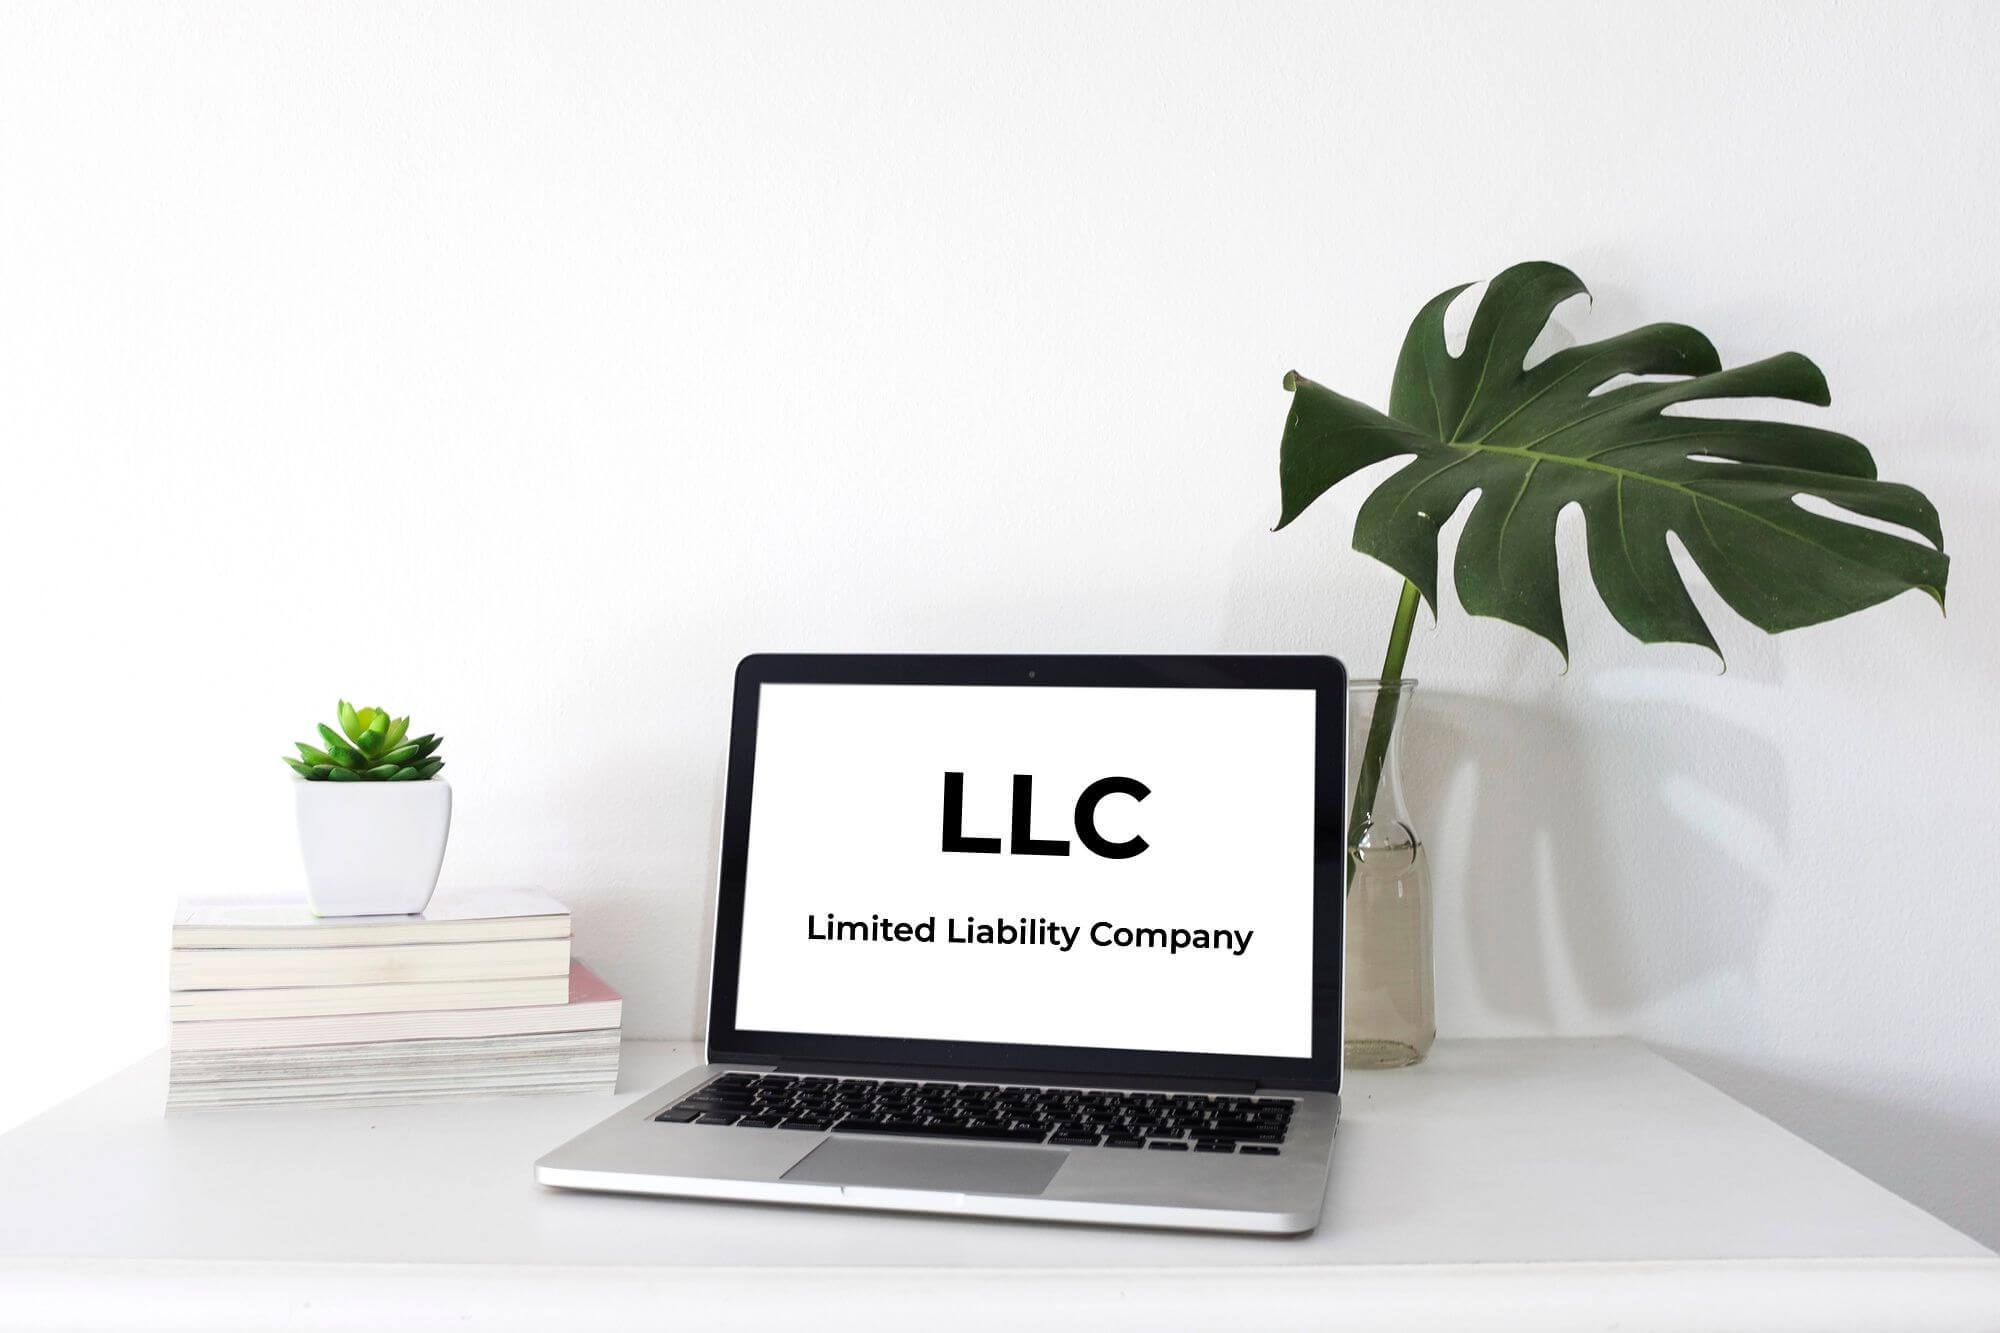 How to Start an LLC in 7 Easy Steps